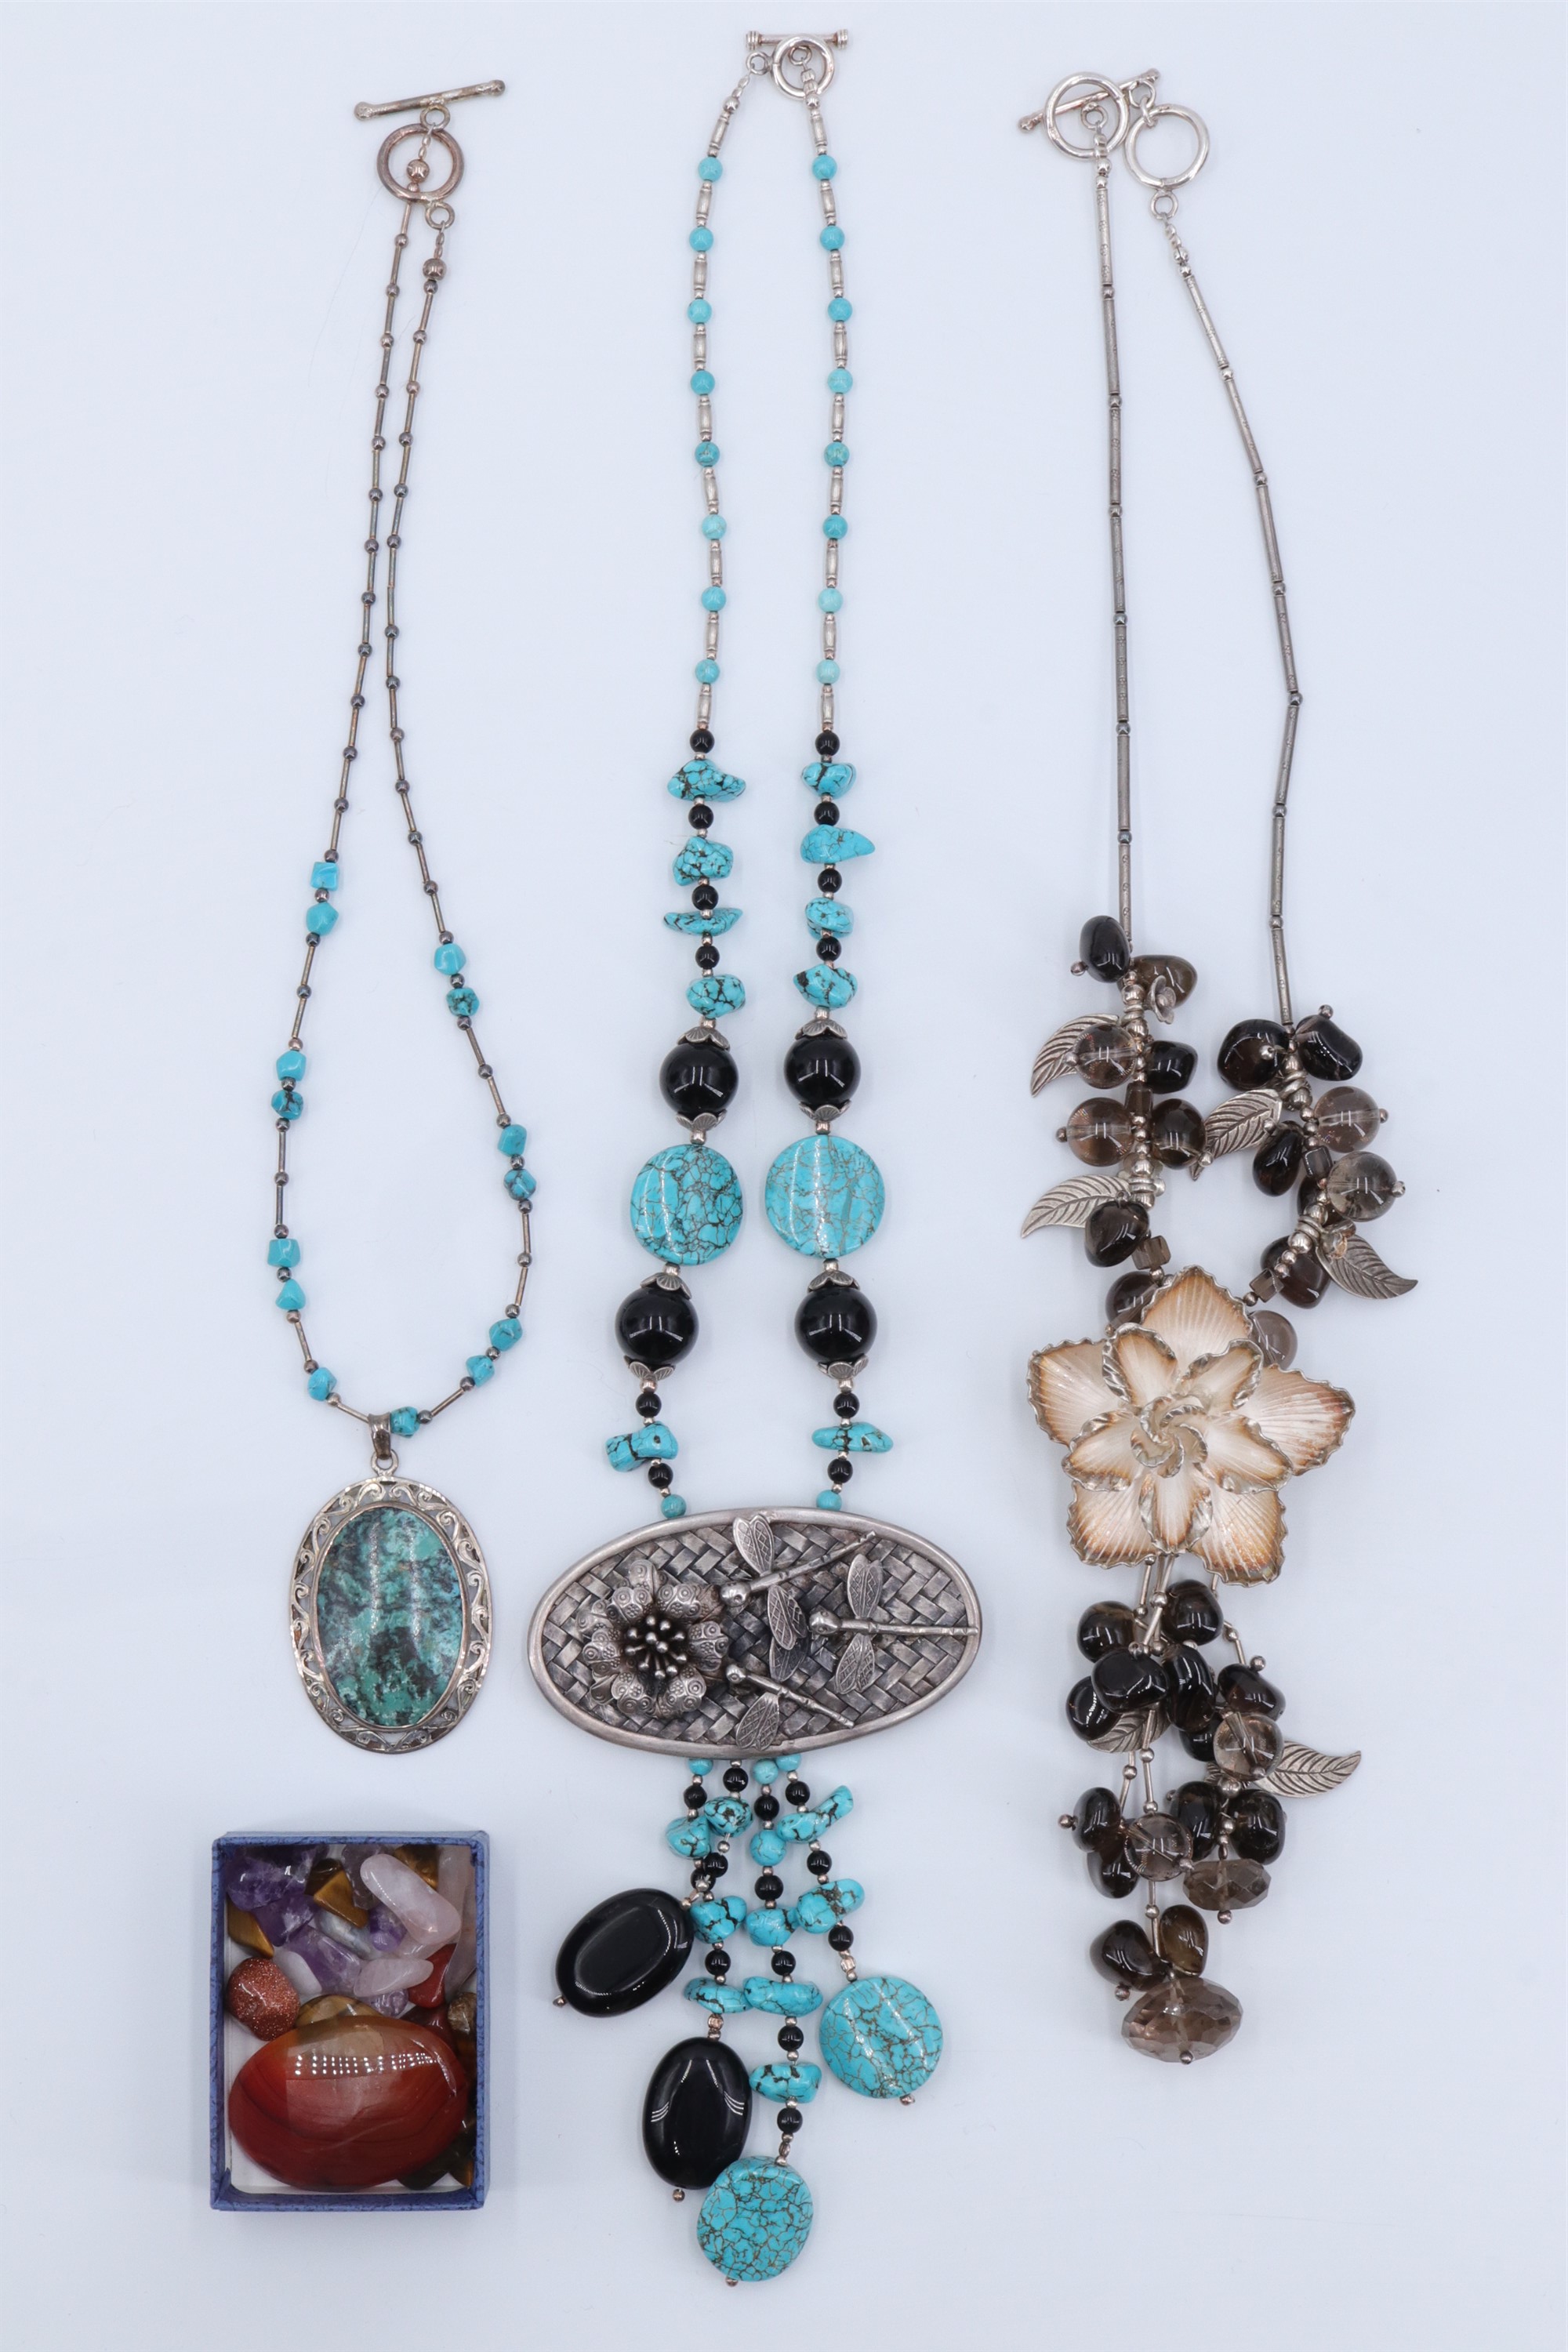 Three late 20th Century silver and semi precious stone necklaces, comprising alternating turquoise